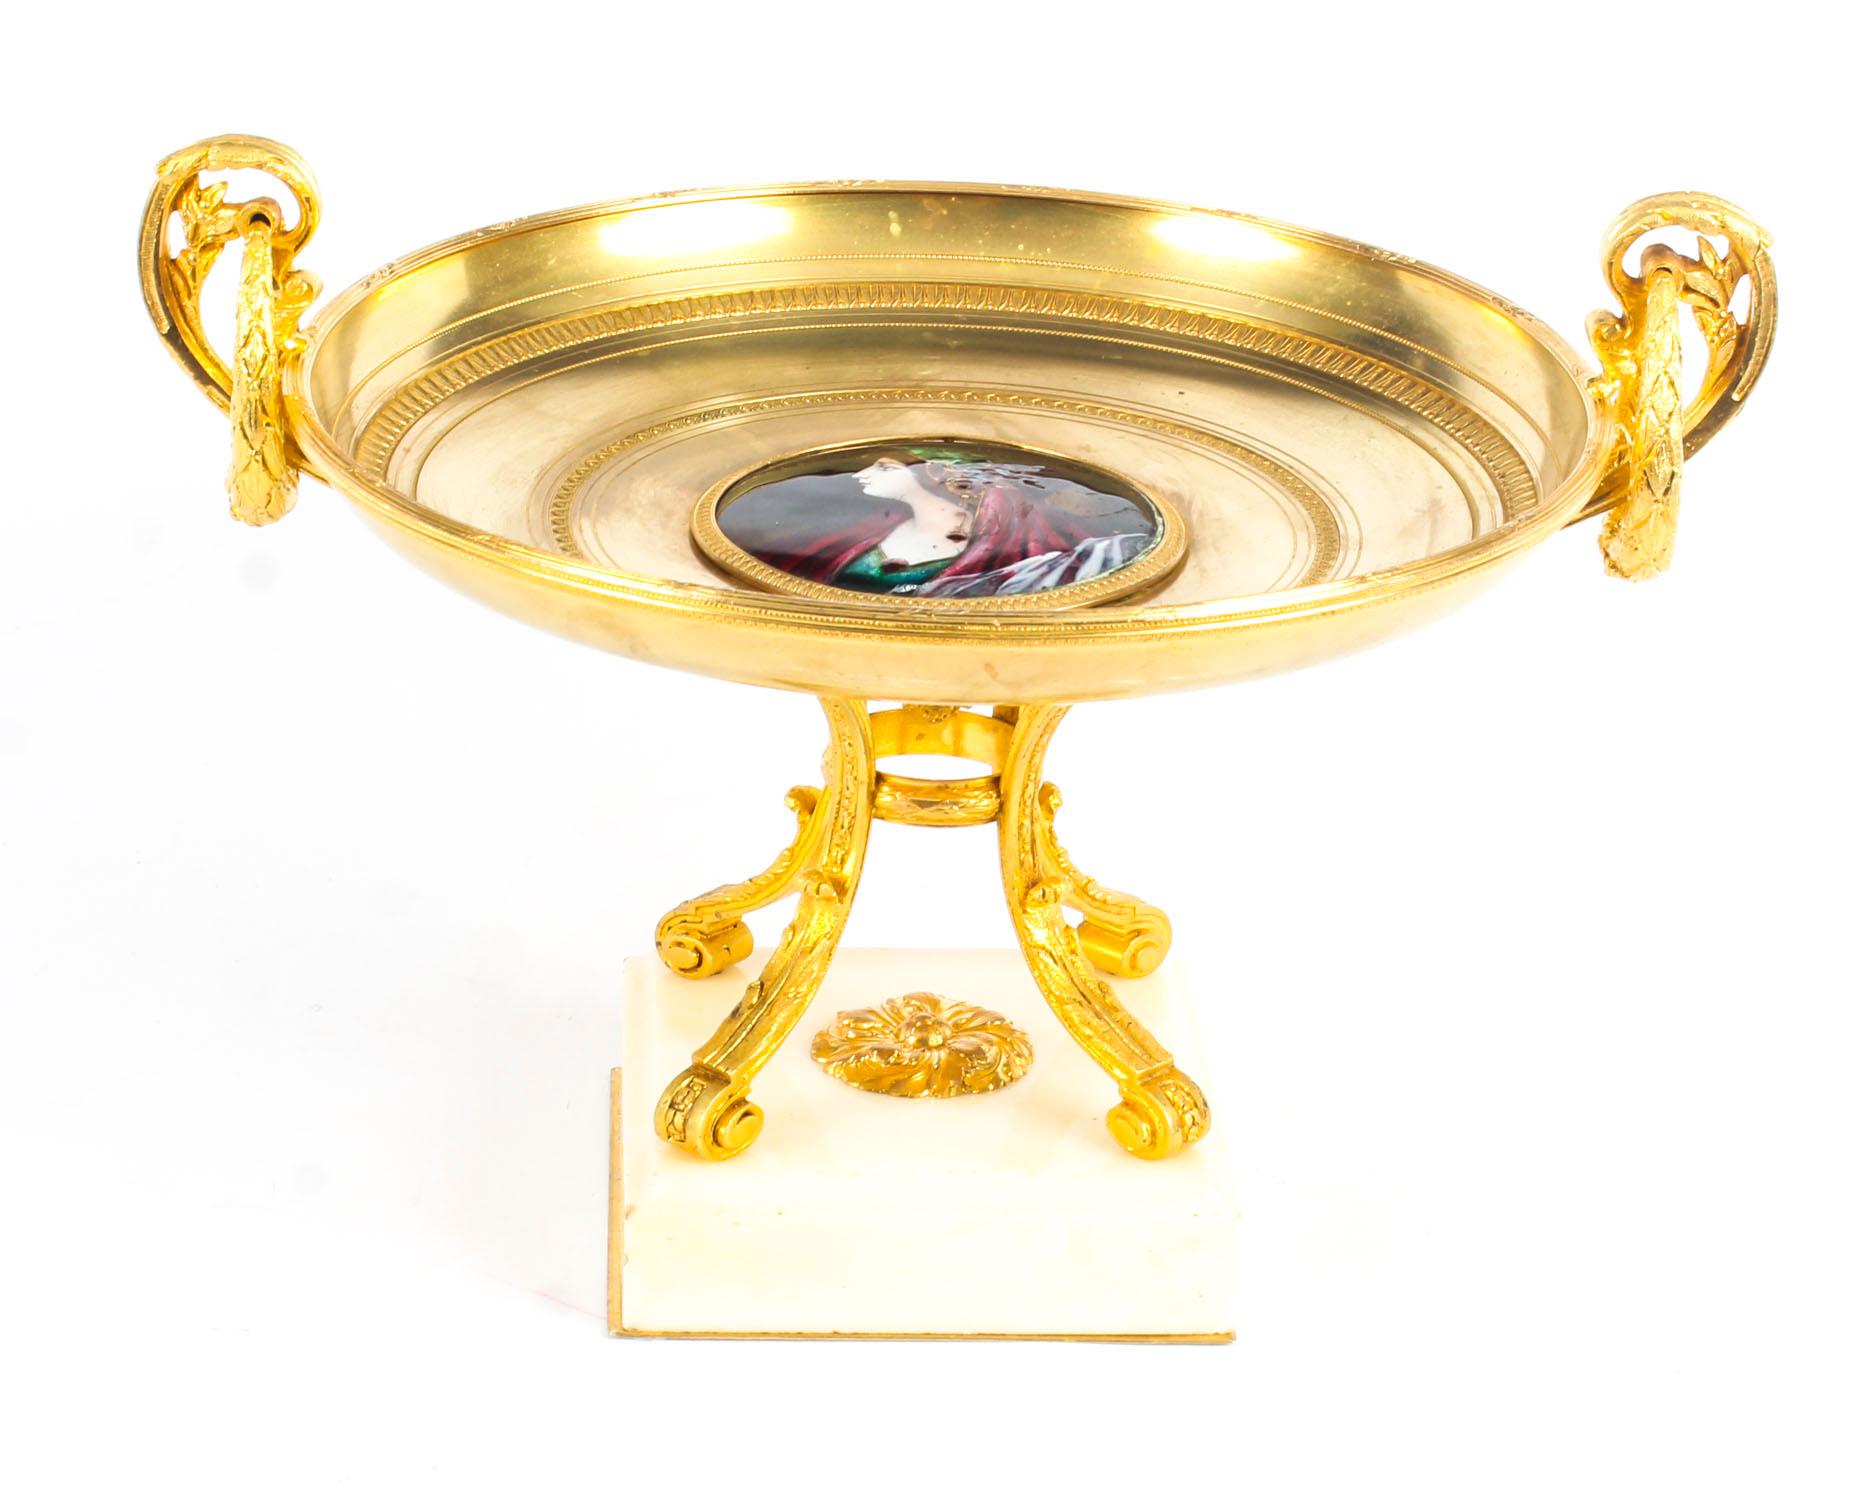 This is an impressive and highly decorative French ormolu tazza, mid-19th century in date.

It features twin handles to either side and the centre is inset with a beautiful Limoges enamel plaque depicting a lady in Renaissance clothing. It is